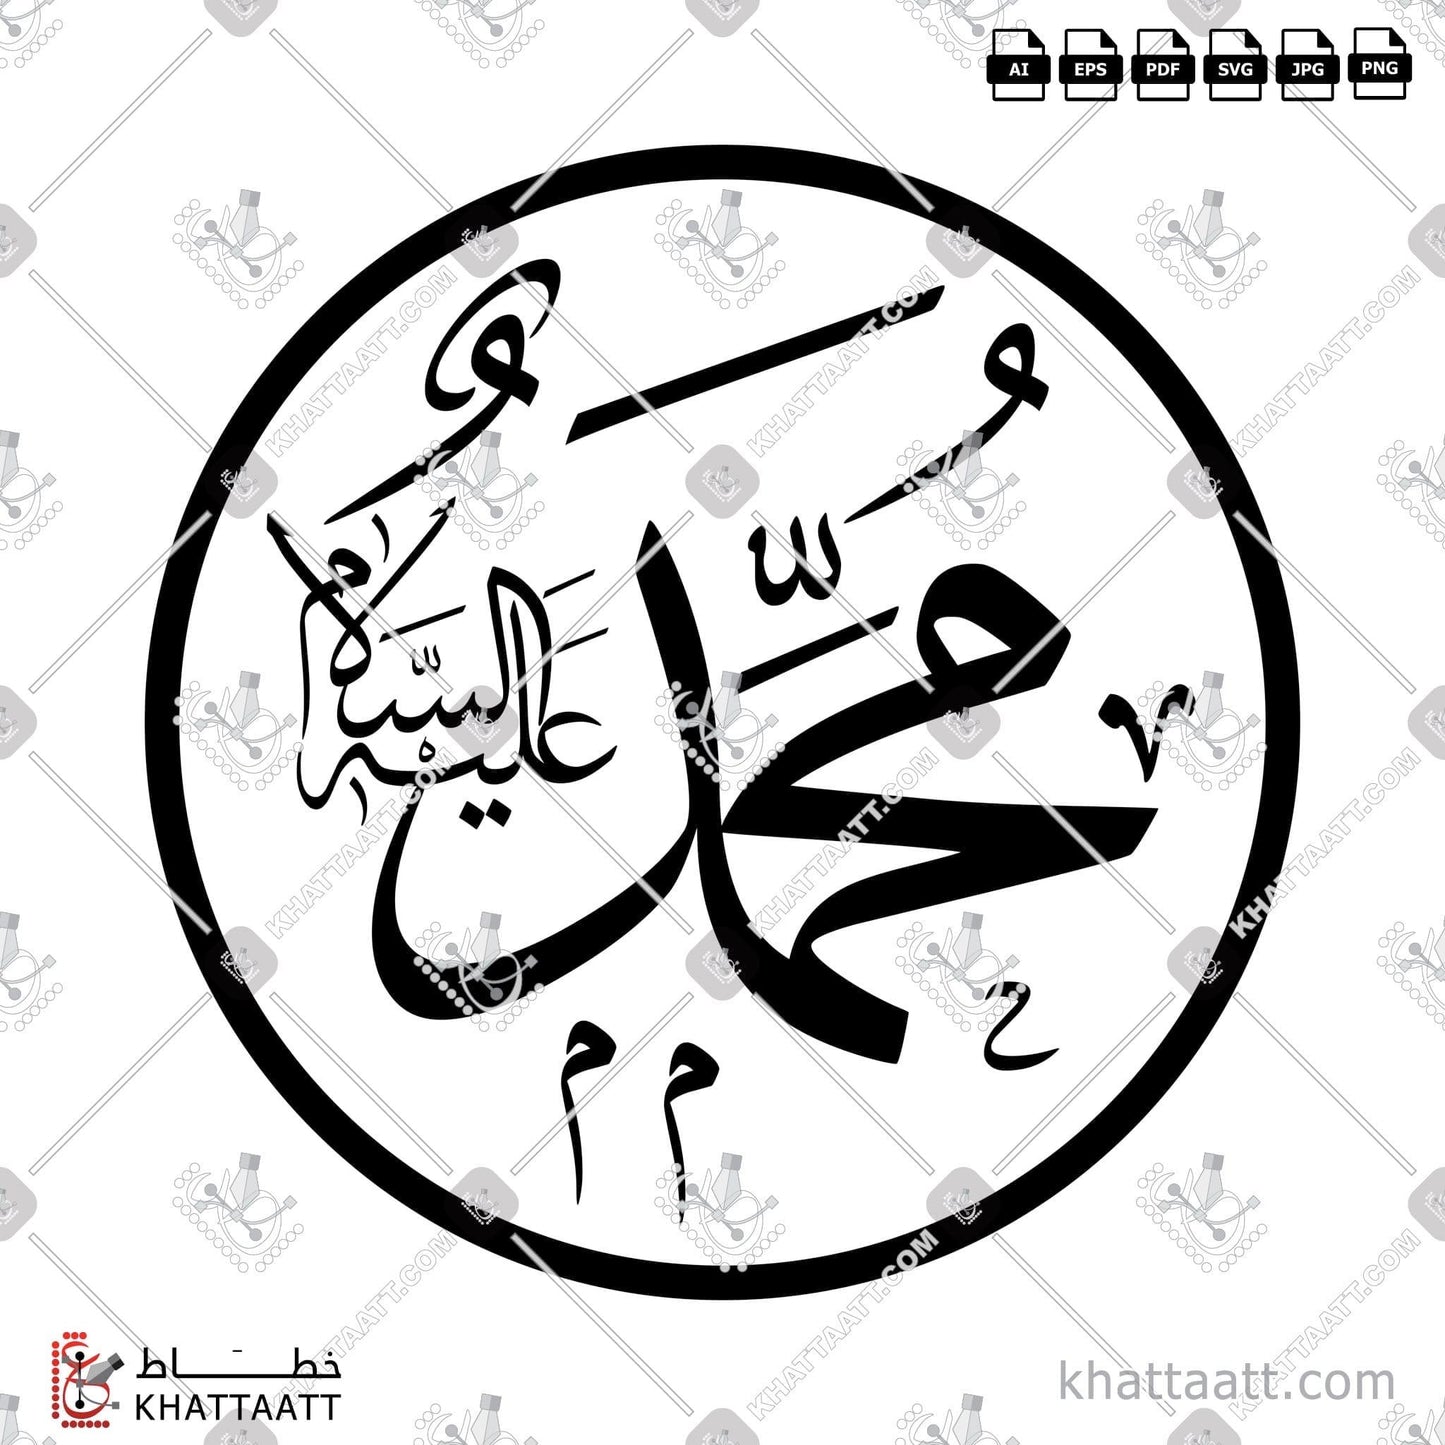 Download Arabic Calligraphy of Muhammad (ﷺ) سيدنا محمد in Thuluth - خط الثلث in vector and .png